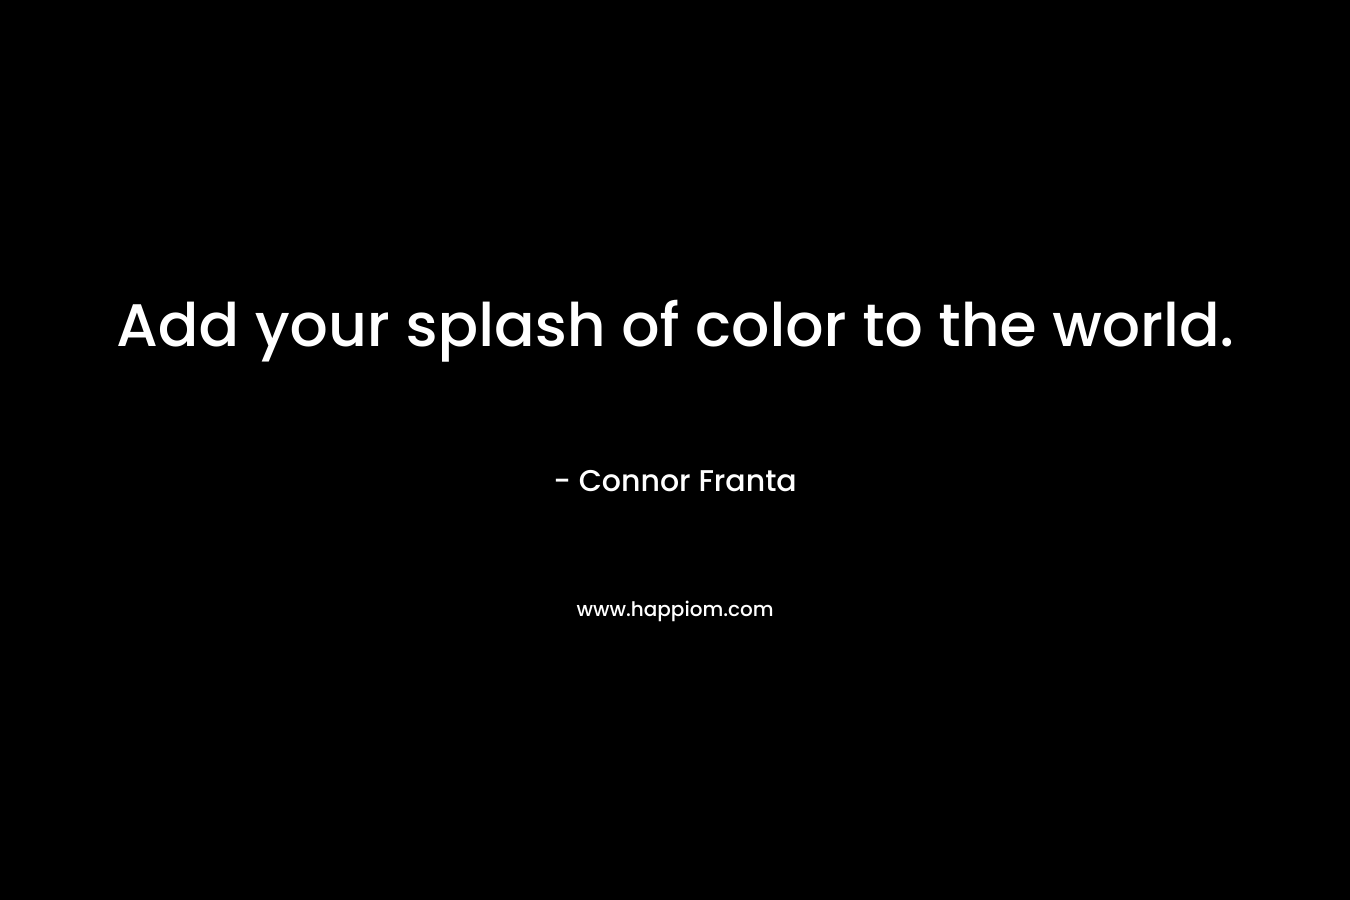 Add your splash of color to the world. – Connor Franta